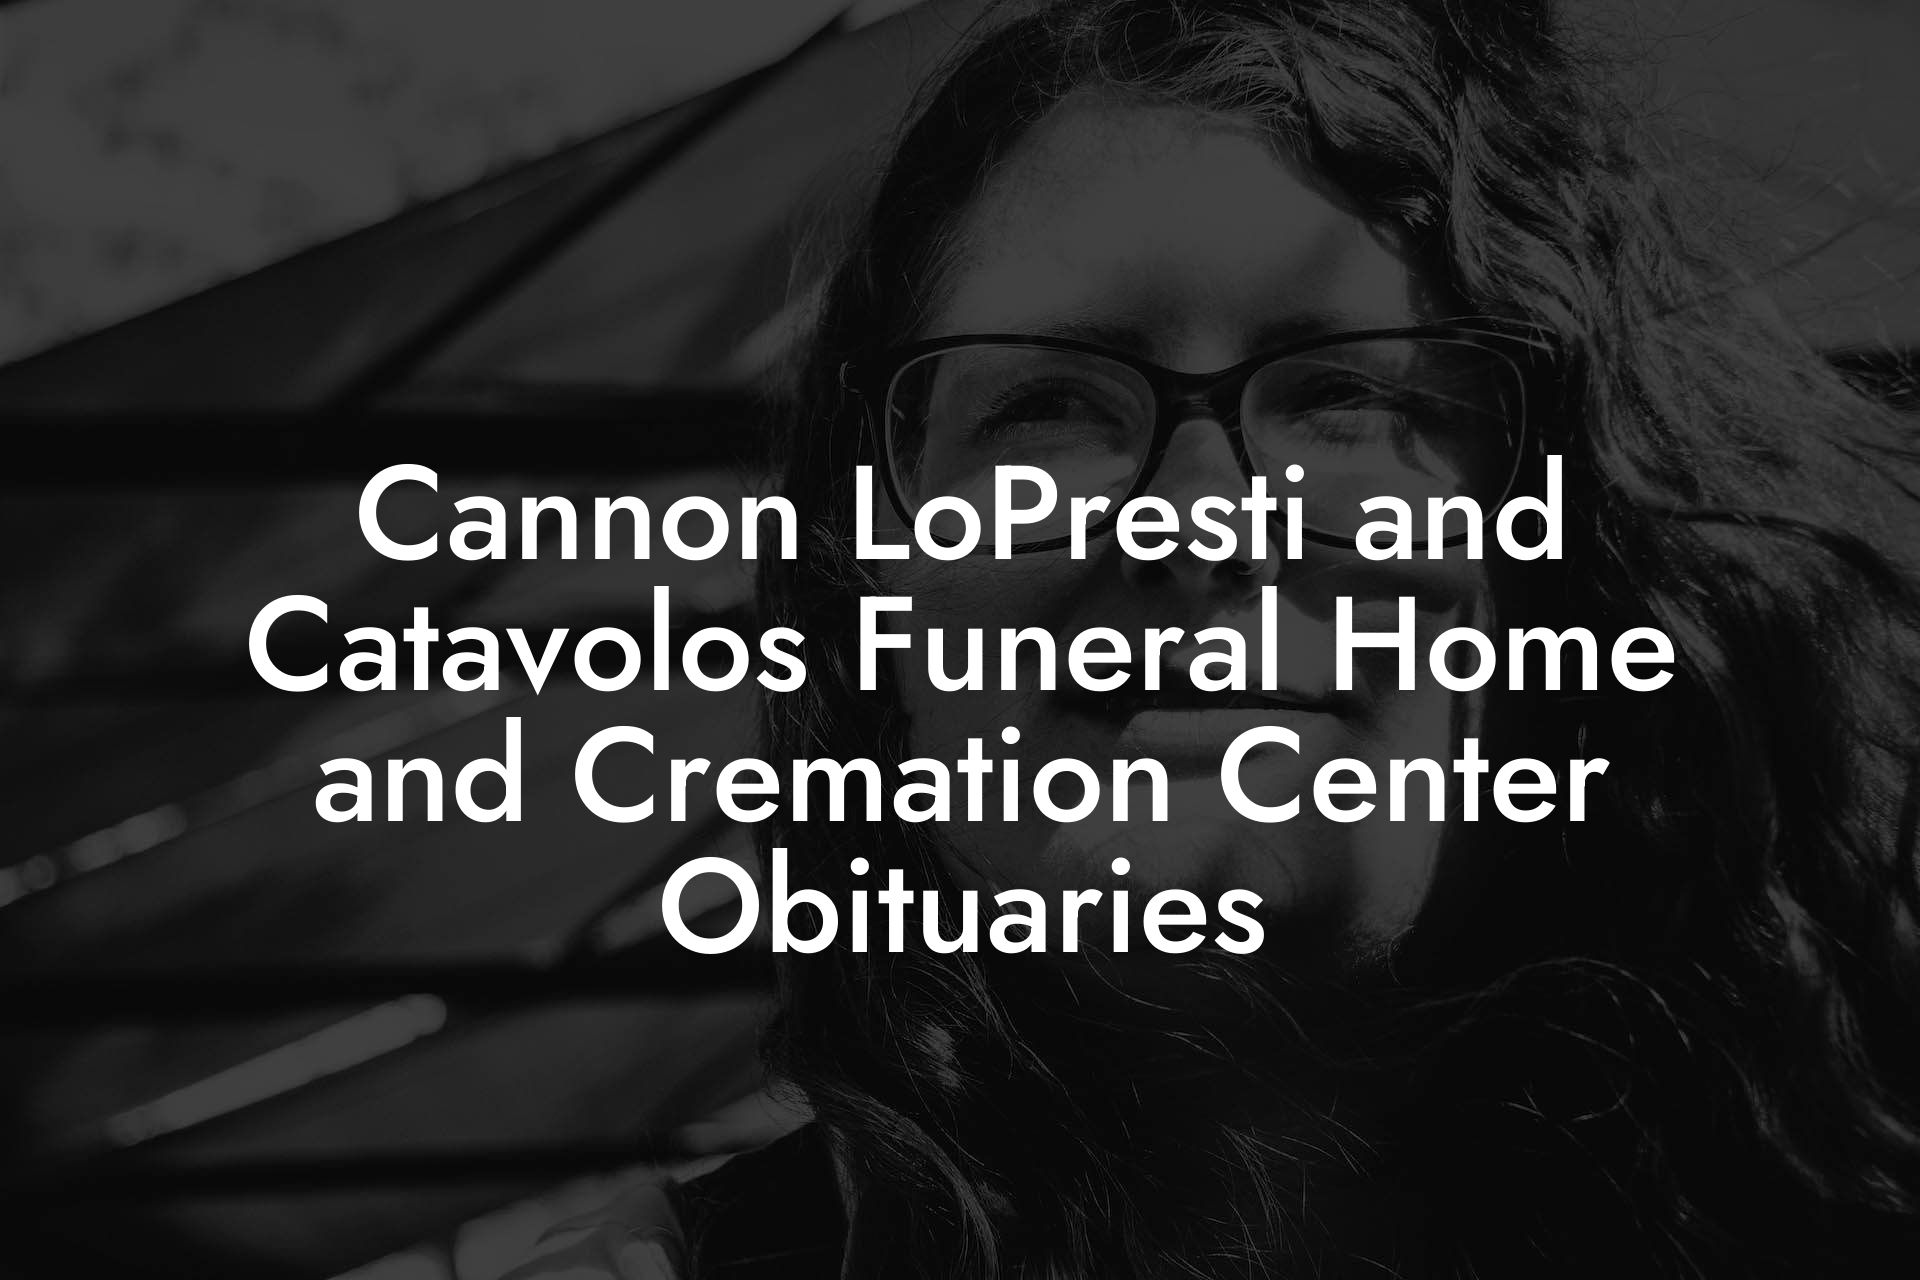 Cannon LoPresti and Catavolos Funeral Home and Cremation Center Obituaries